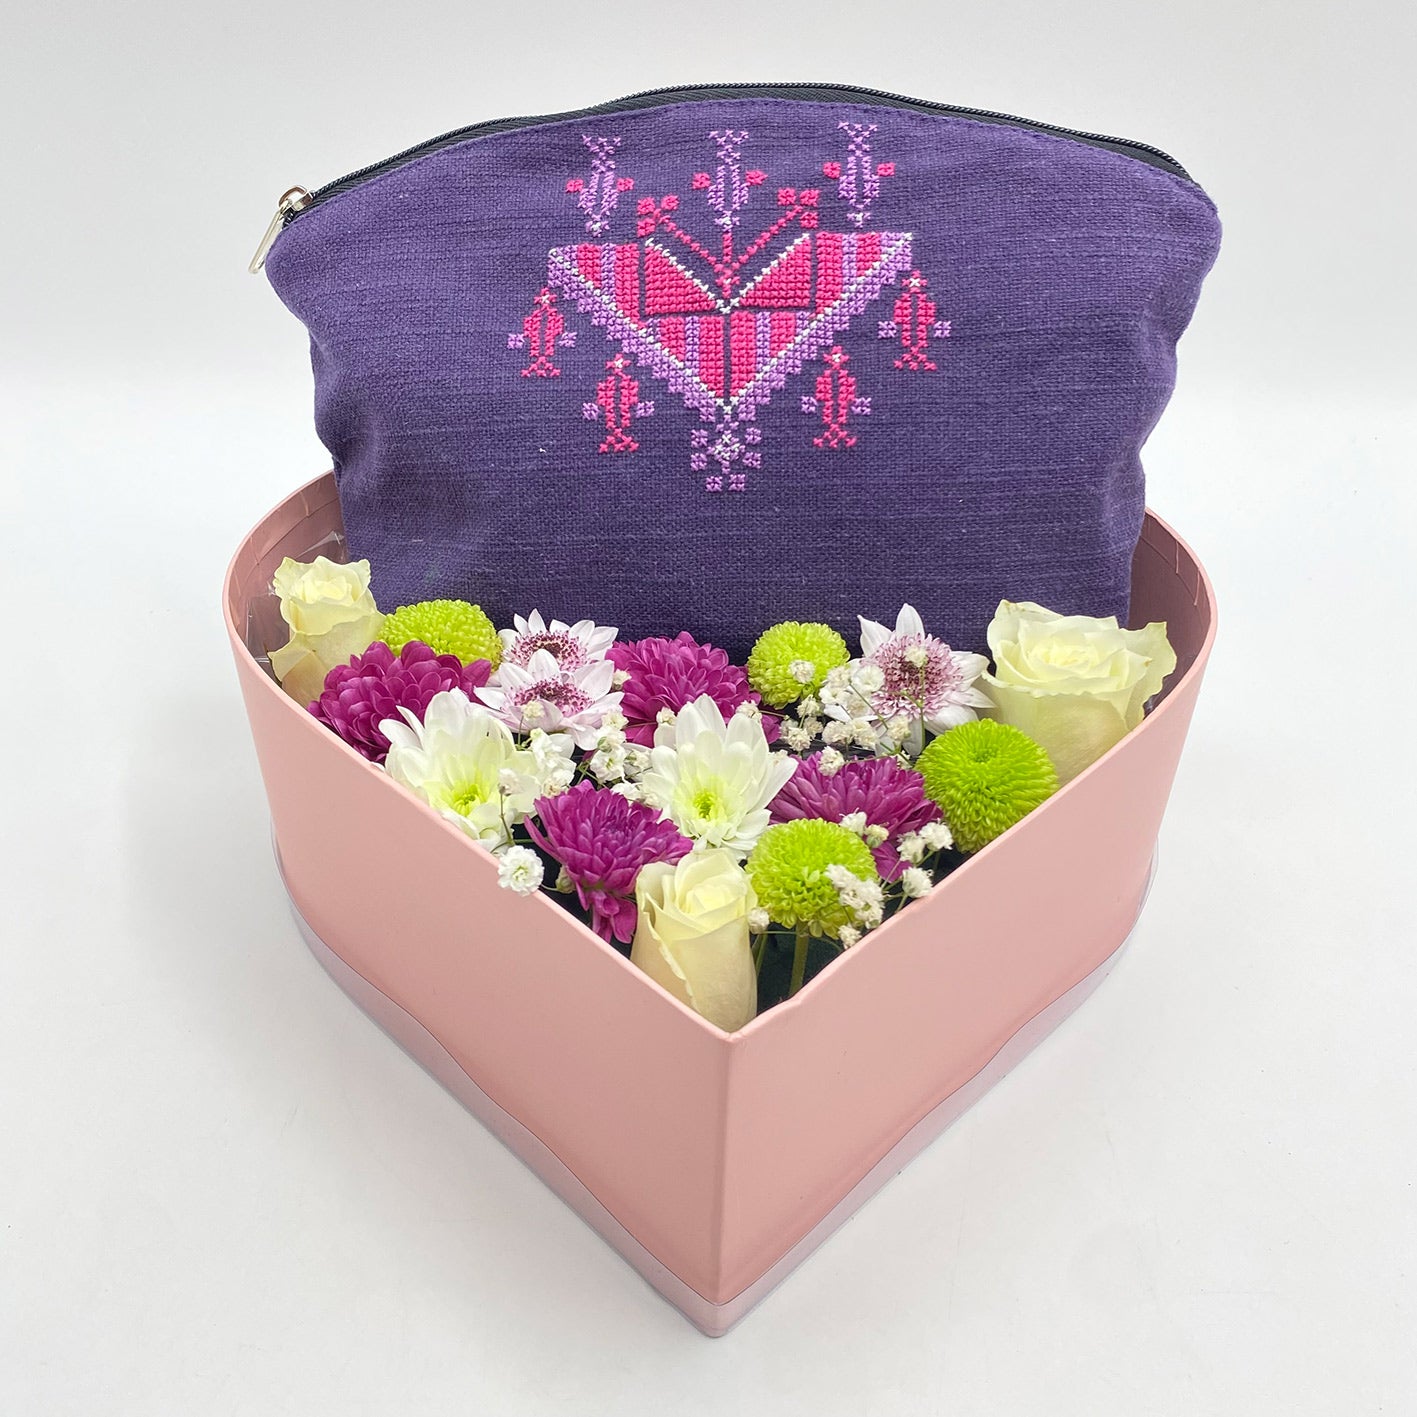 Embroidery Bag and Flowers Bundle from Khoyoot